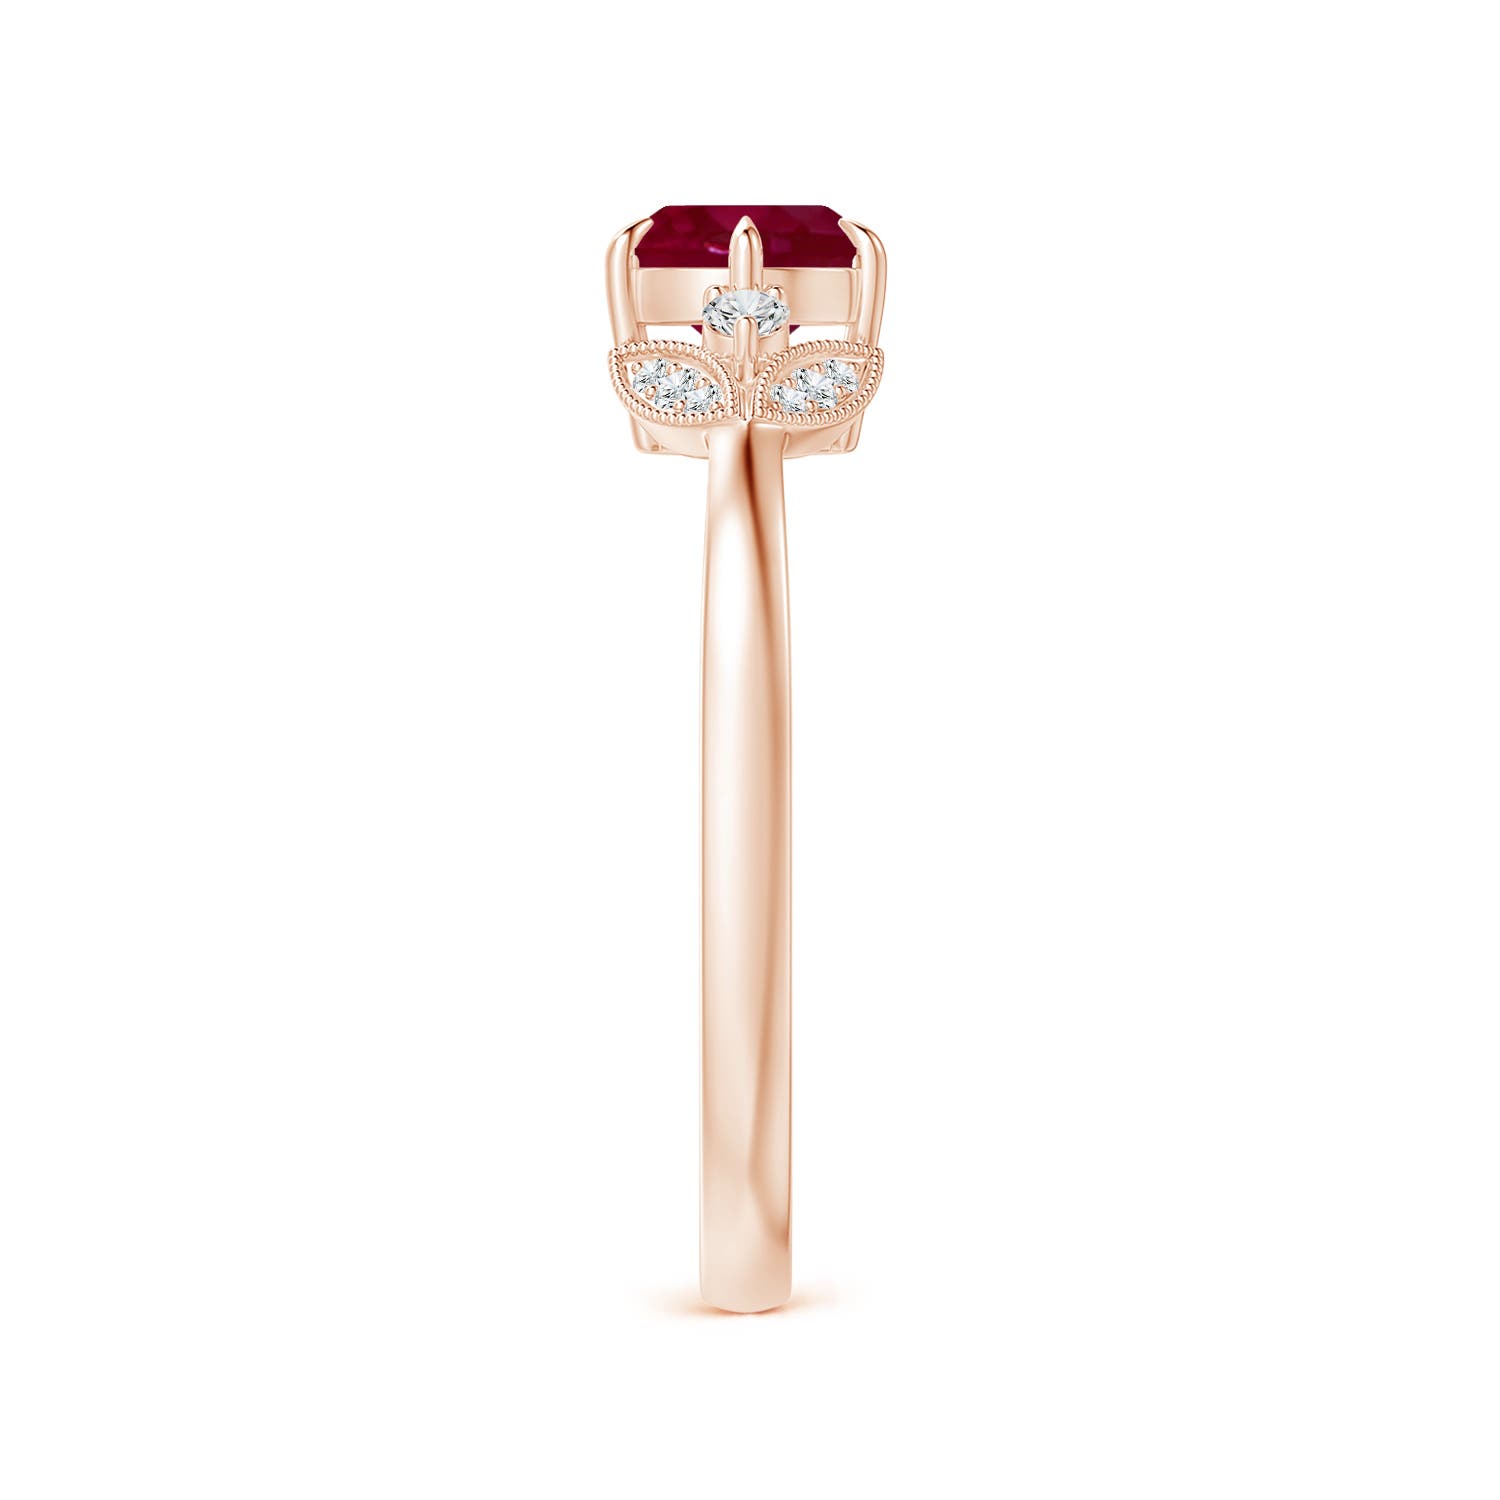 A - Ruby / 1.1 CT / 14 KT Rose Gold